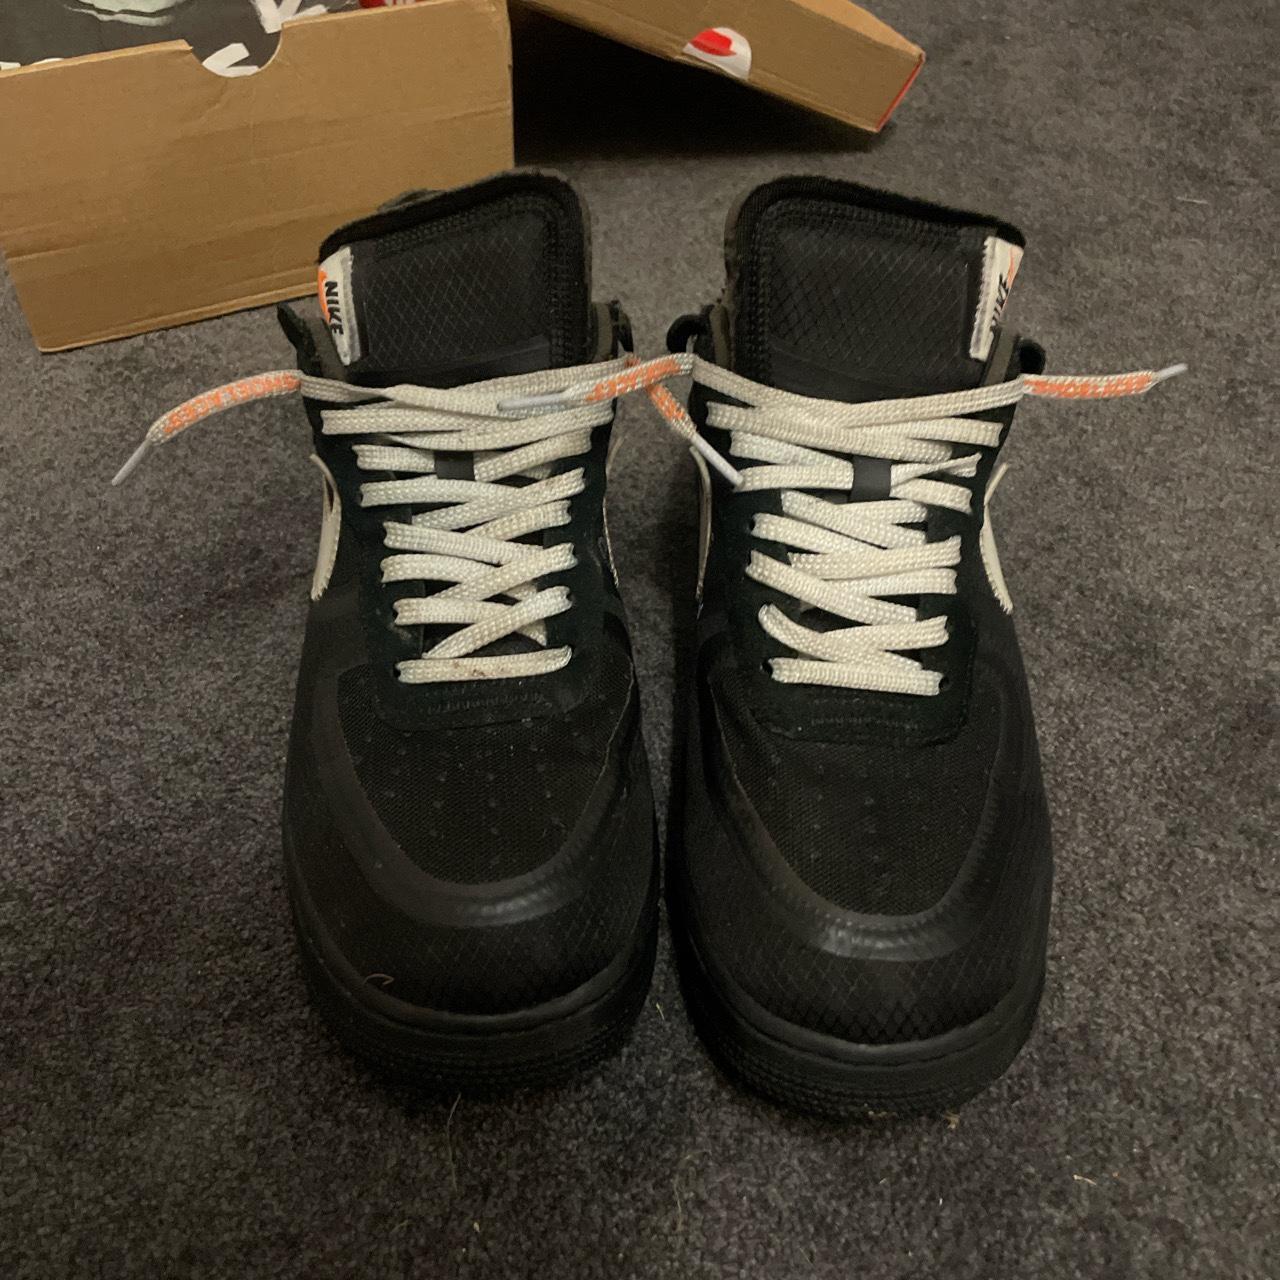 Offwhite Air Force 1 “moma” comes with og box, - Depop